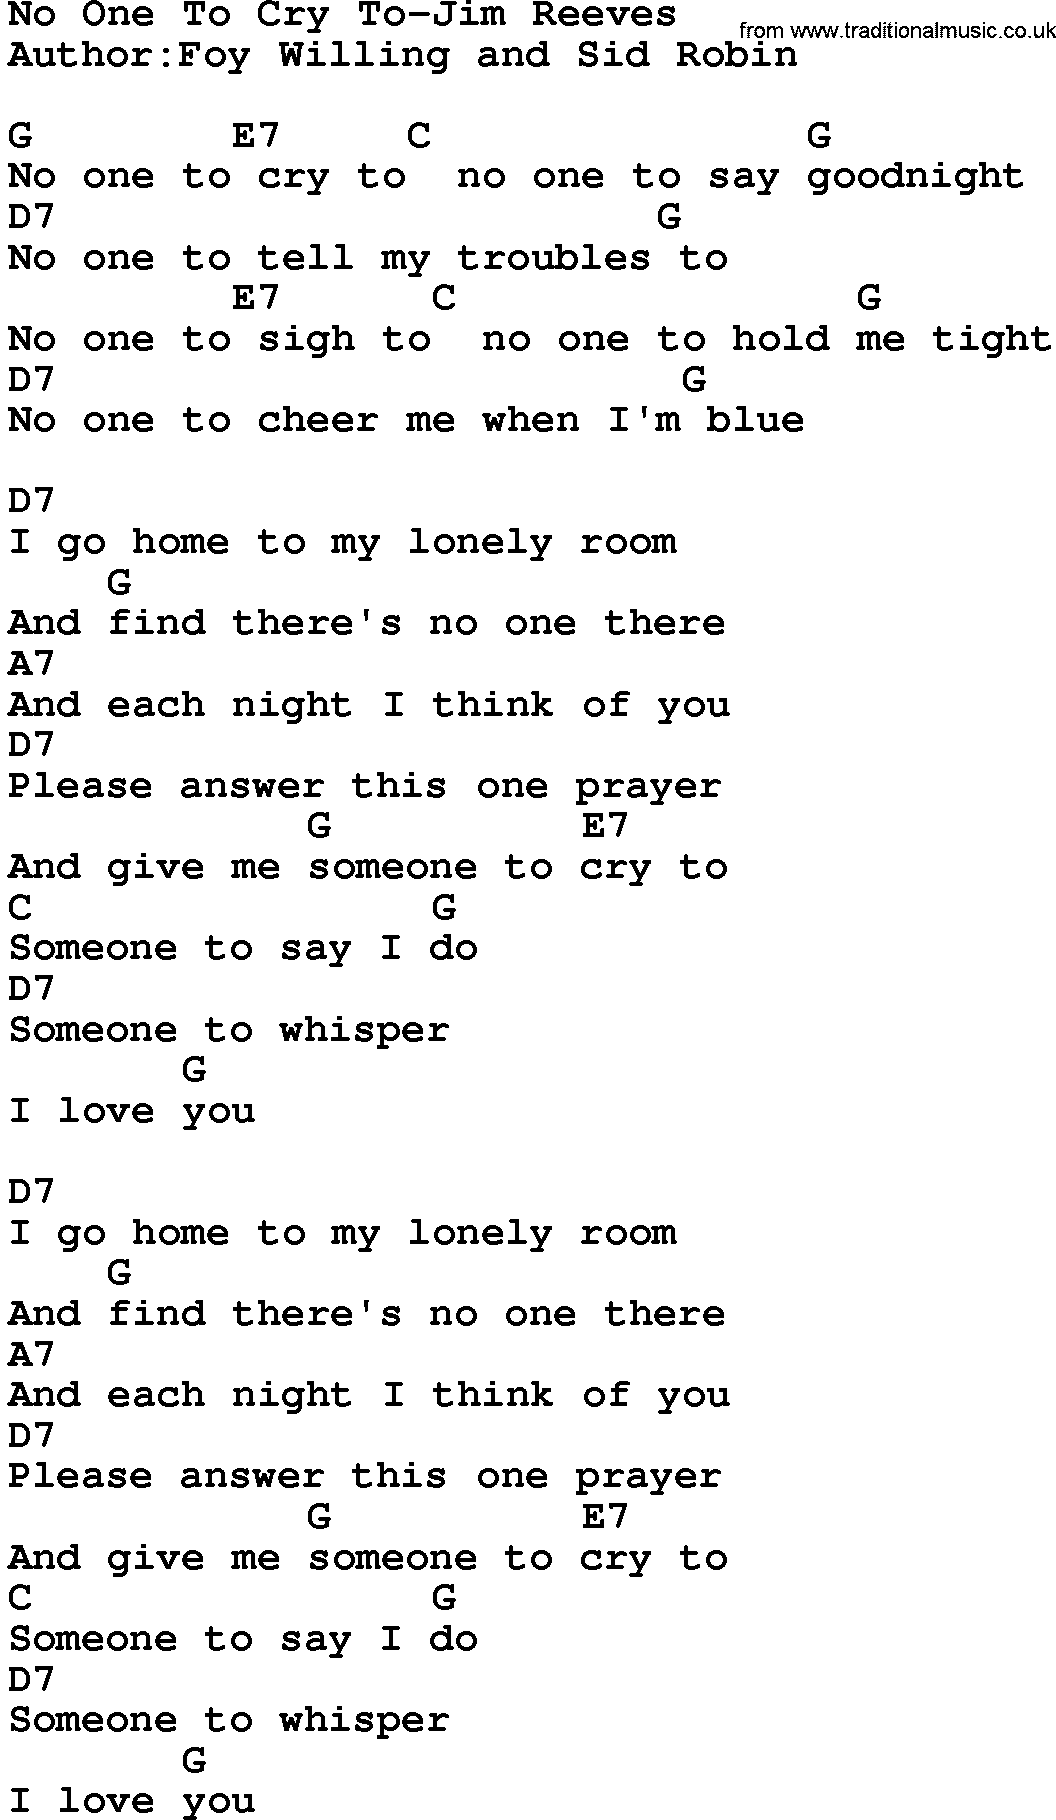 Country music song: No One To Cry To-Jim Reeves lyrics and chords